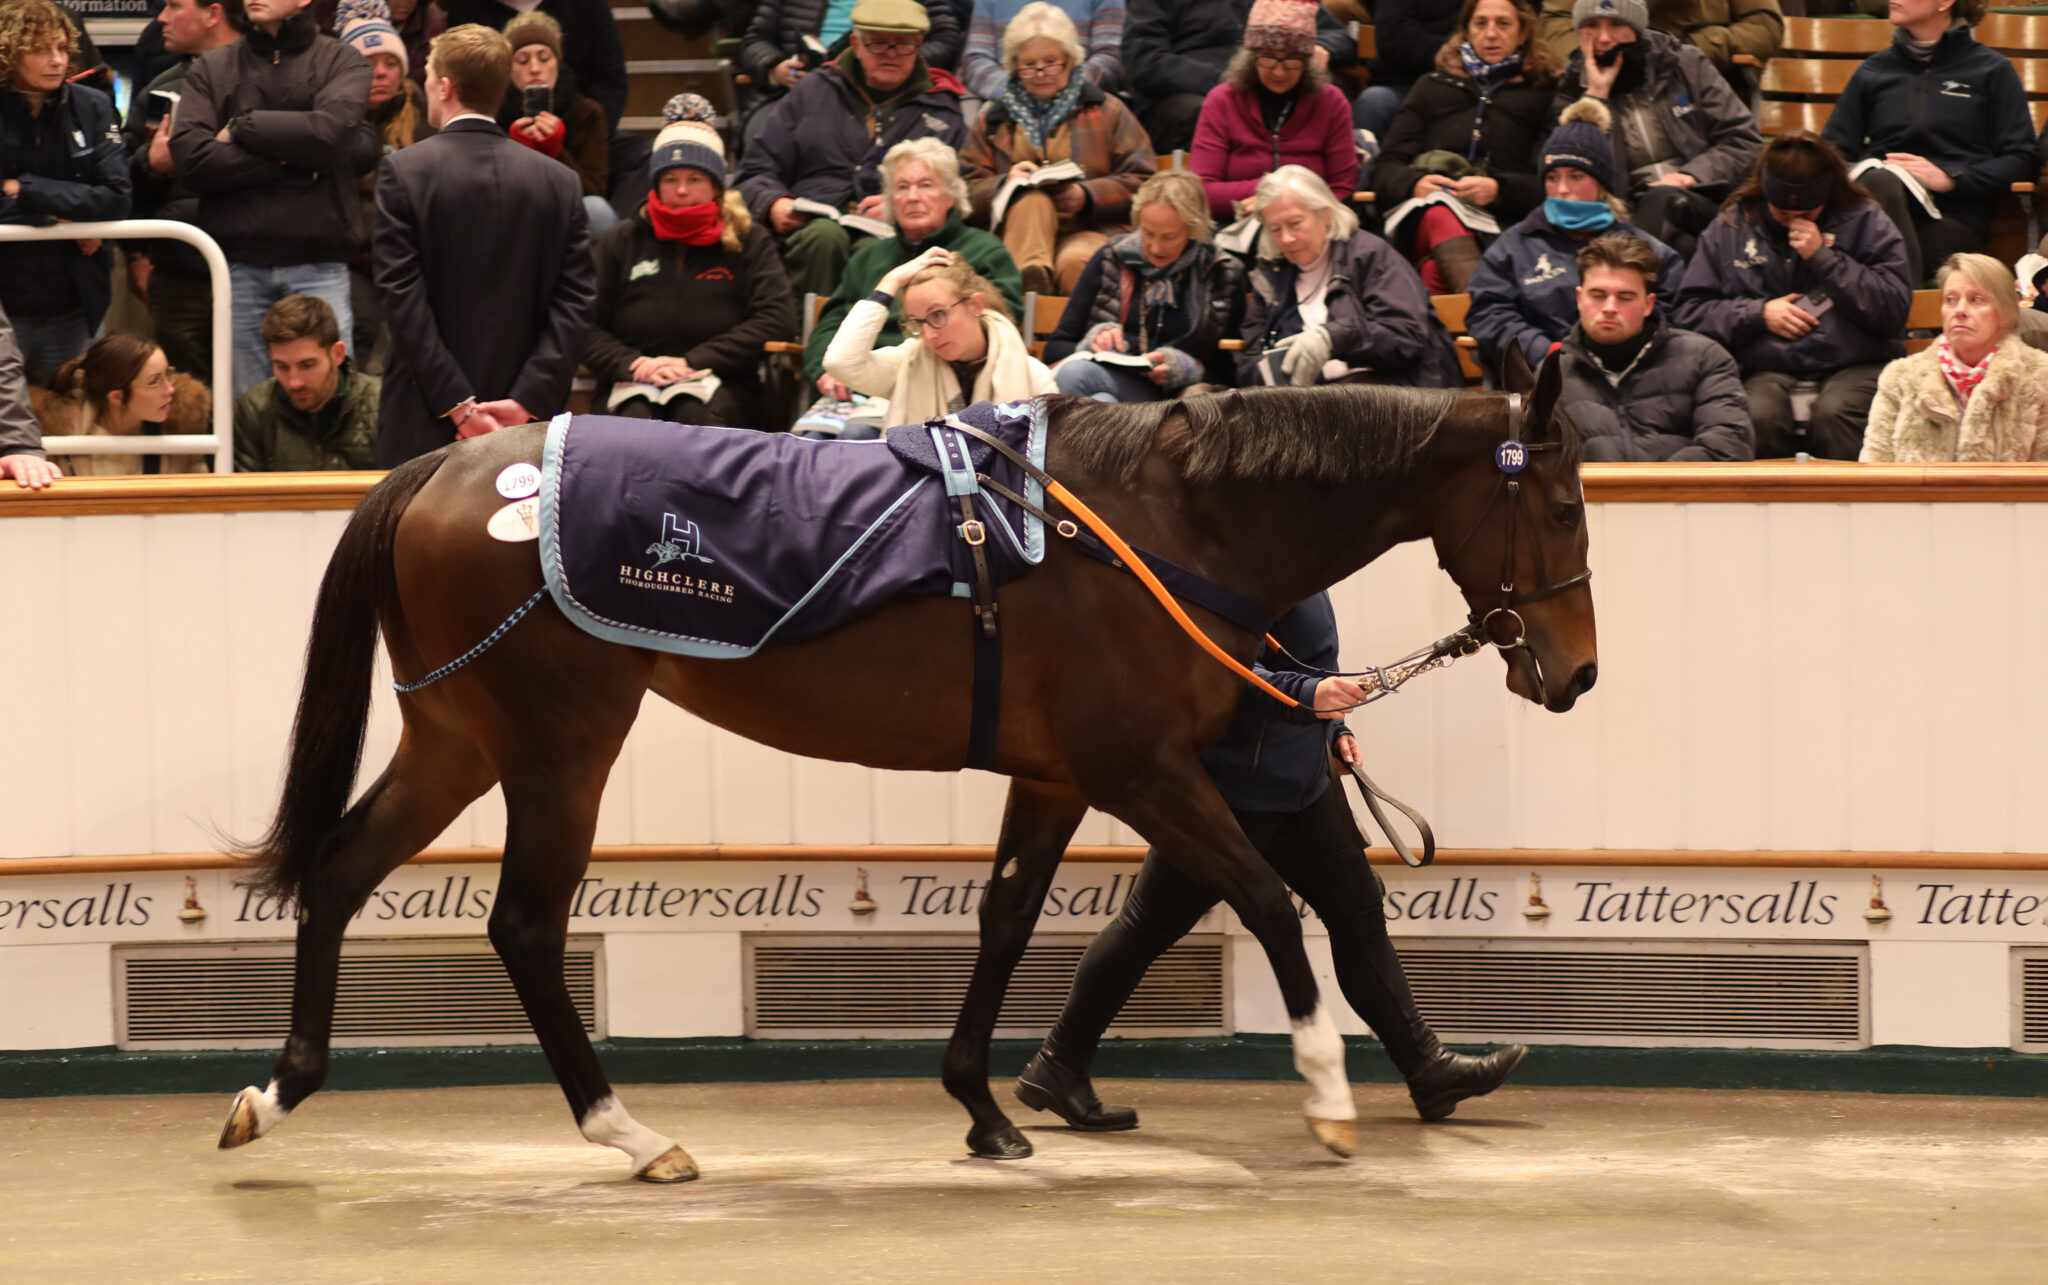 Spectacular scenes at Tattersalls for Highclere Stud-consigned Cachet